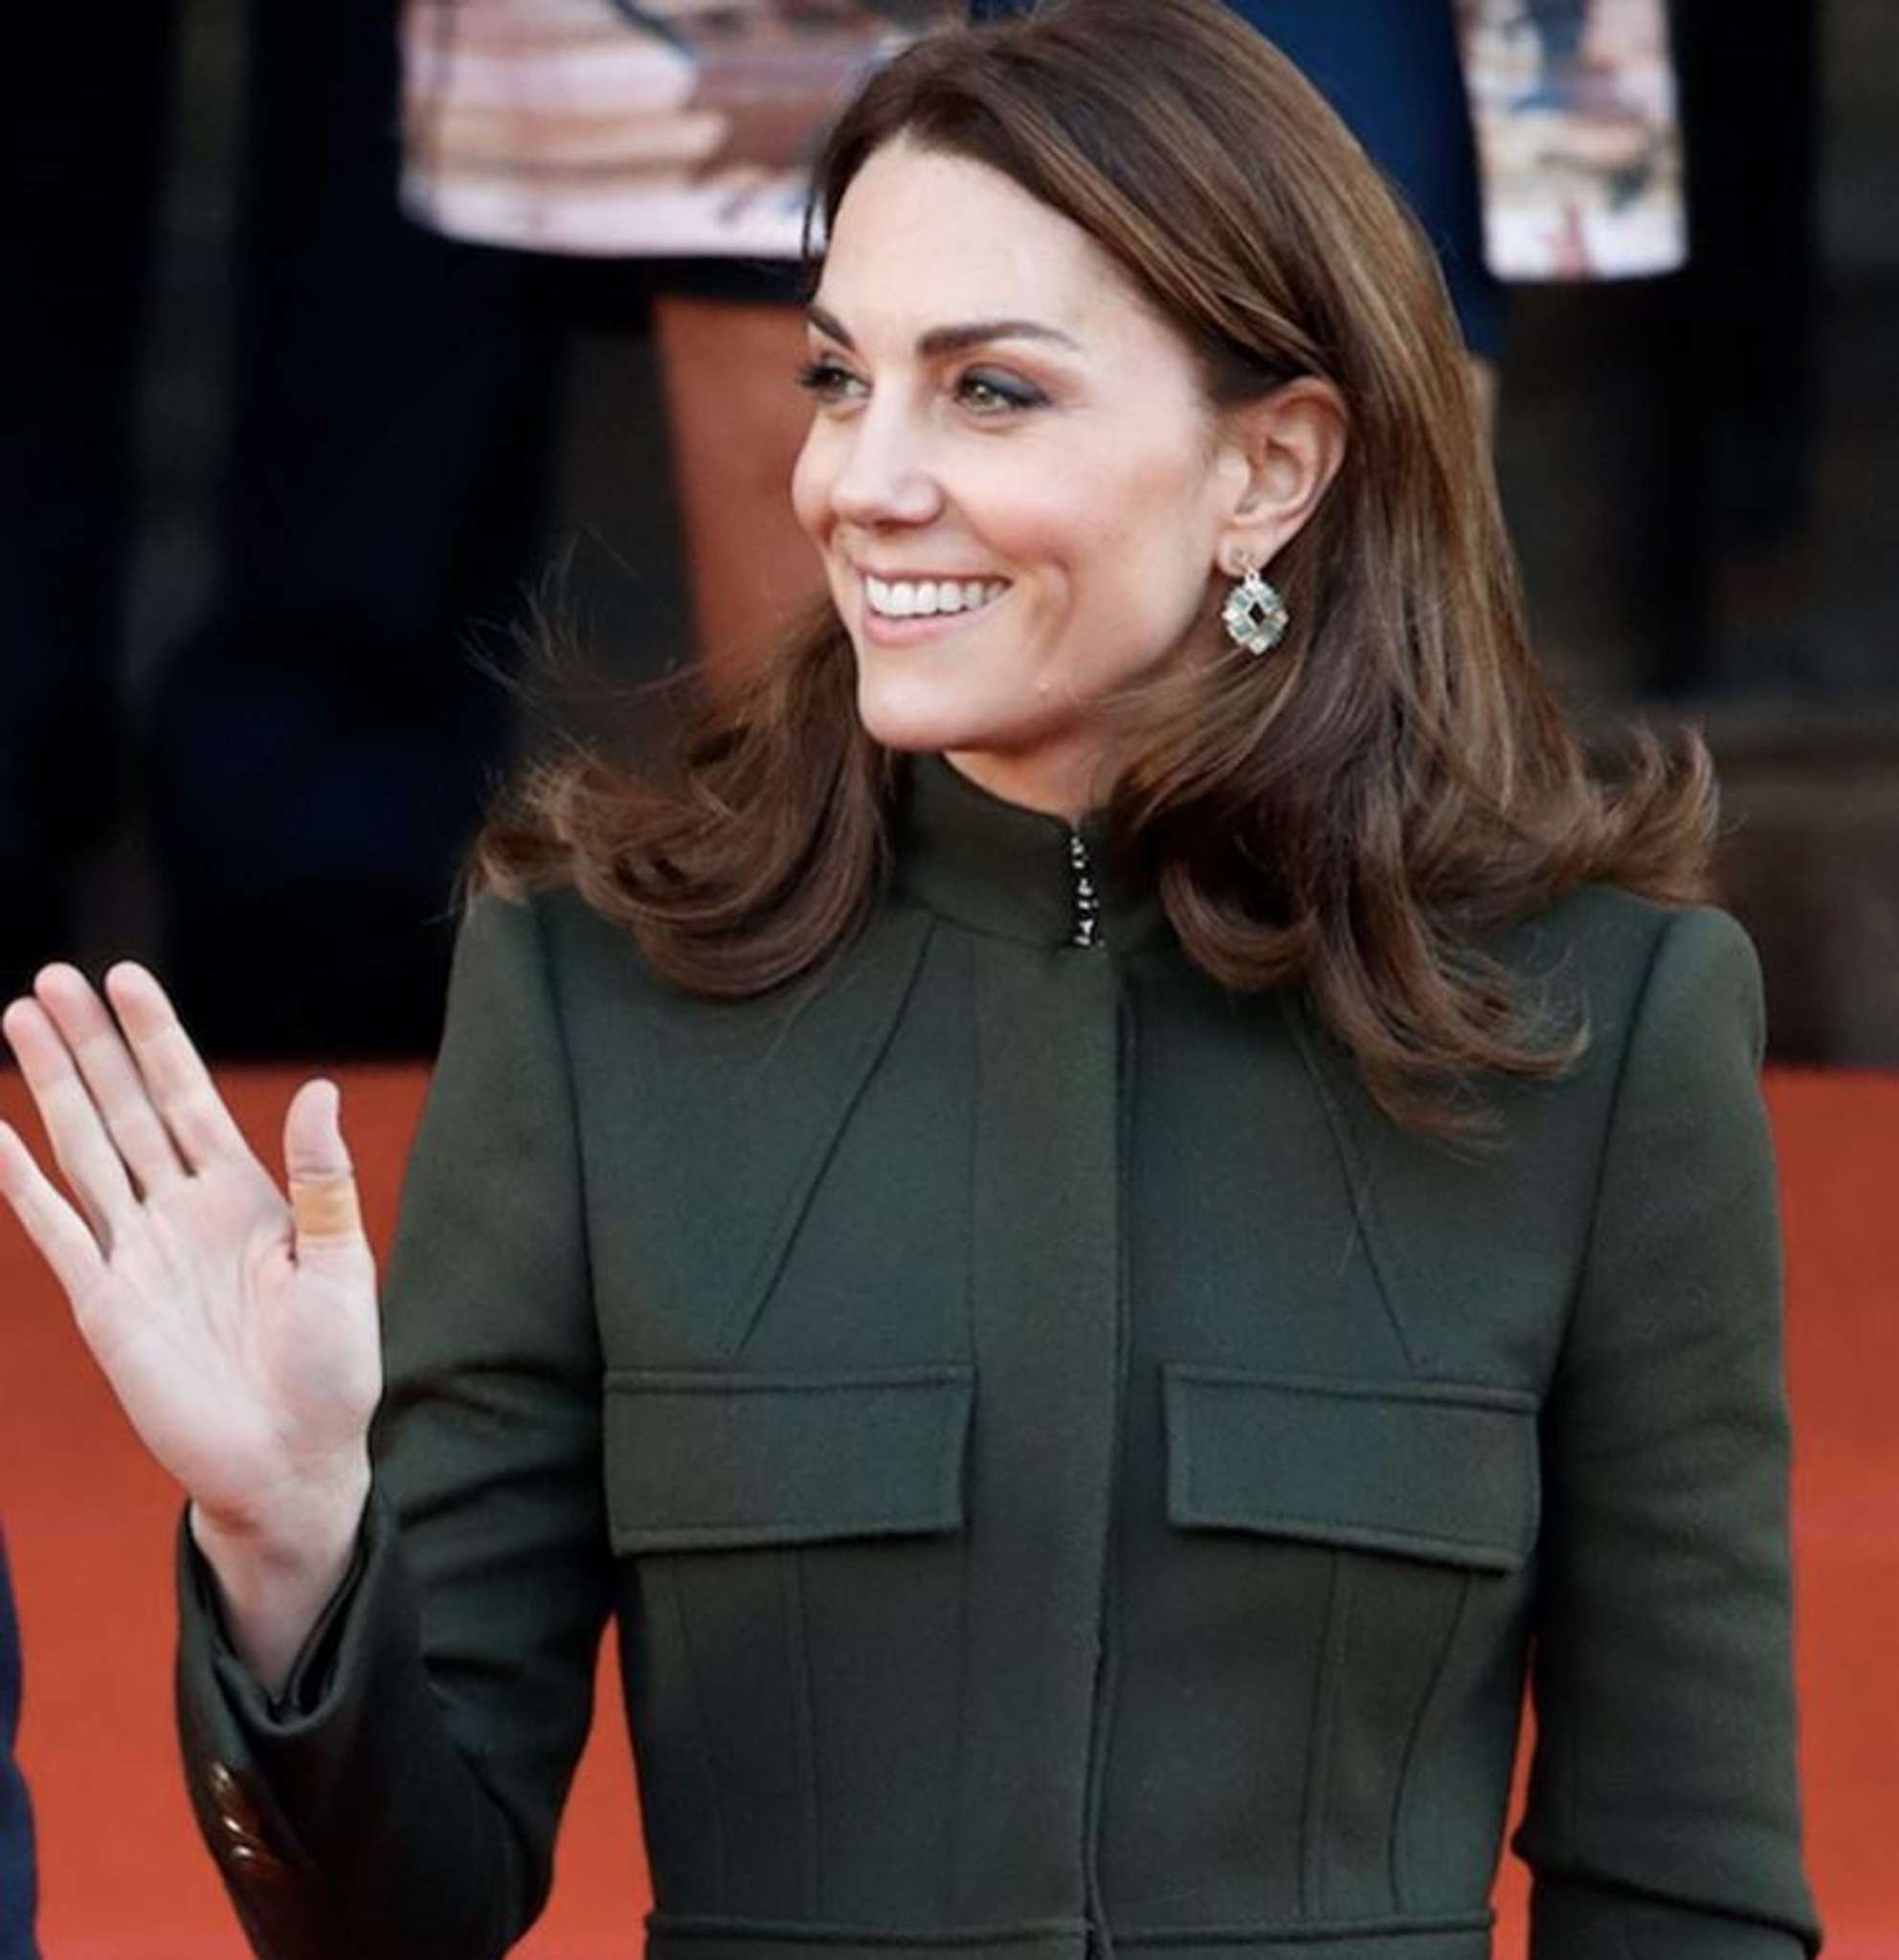 ”kate-middleton-hurt-her-hand-watch-out-williams-wife-worried-the-british”